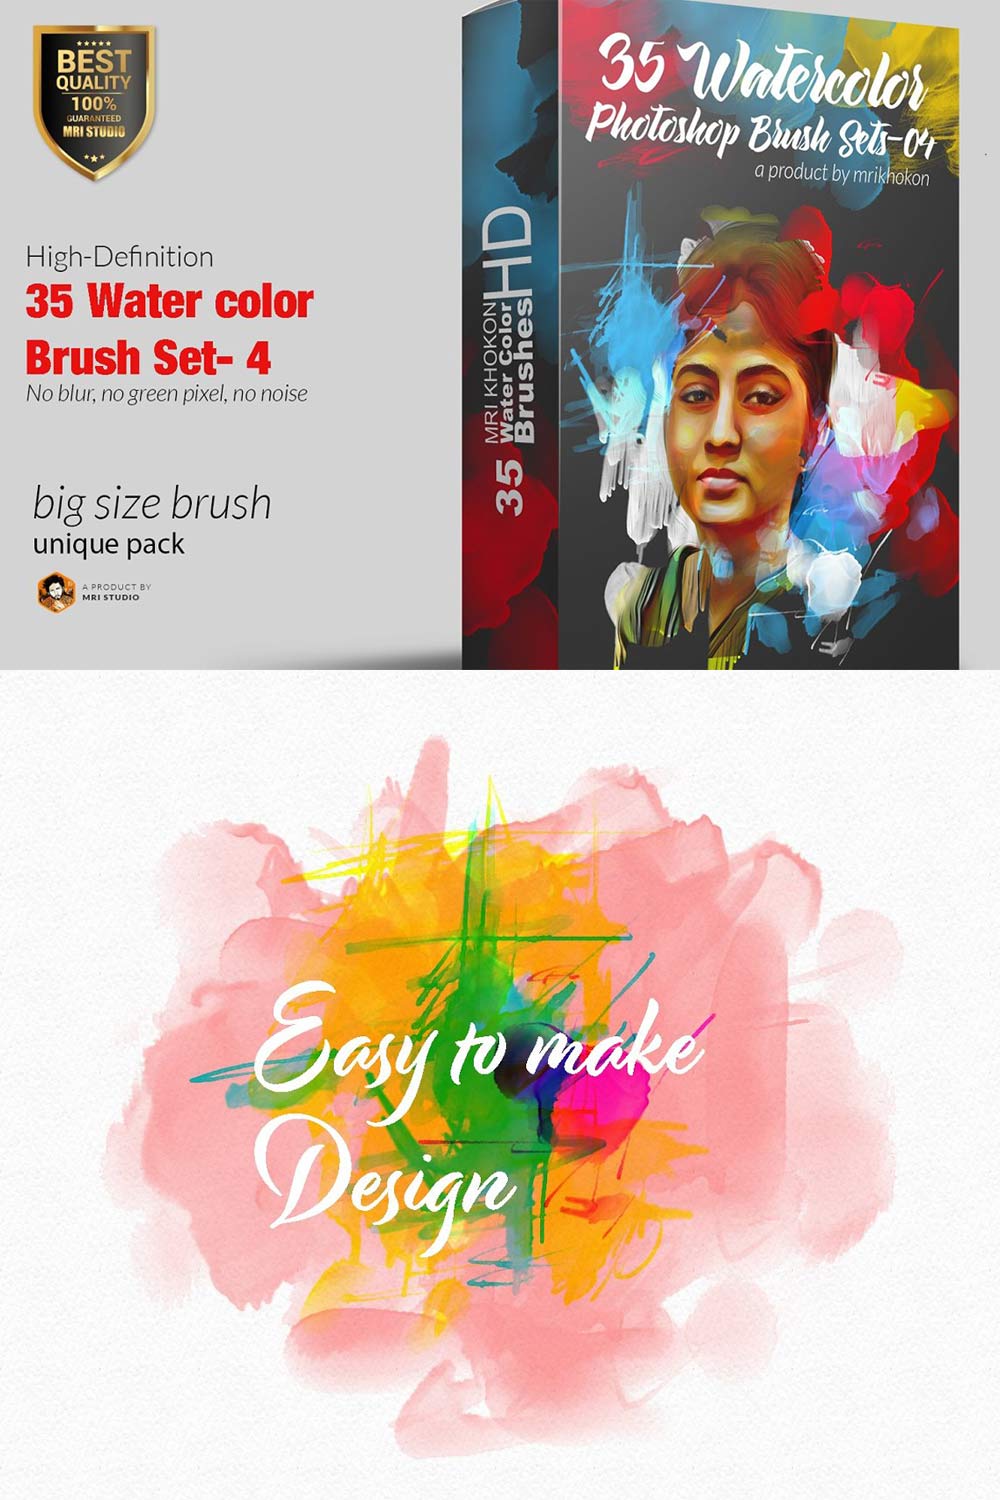 Water color Photoshop Brush Set-4 pinterest preview image.